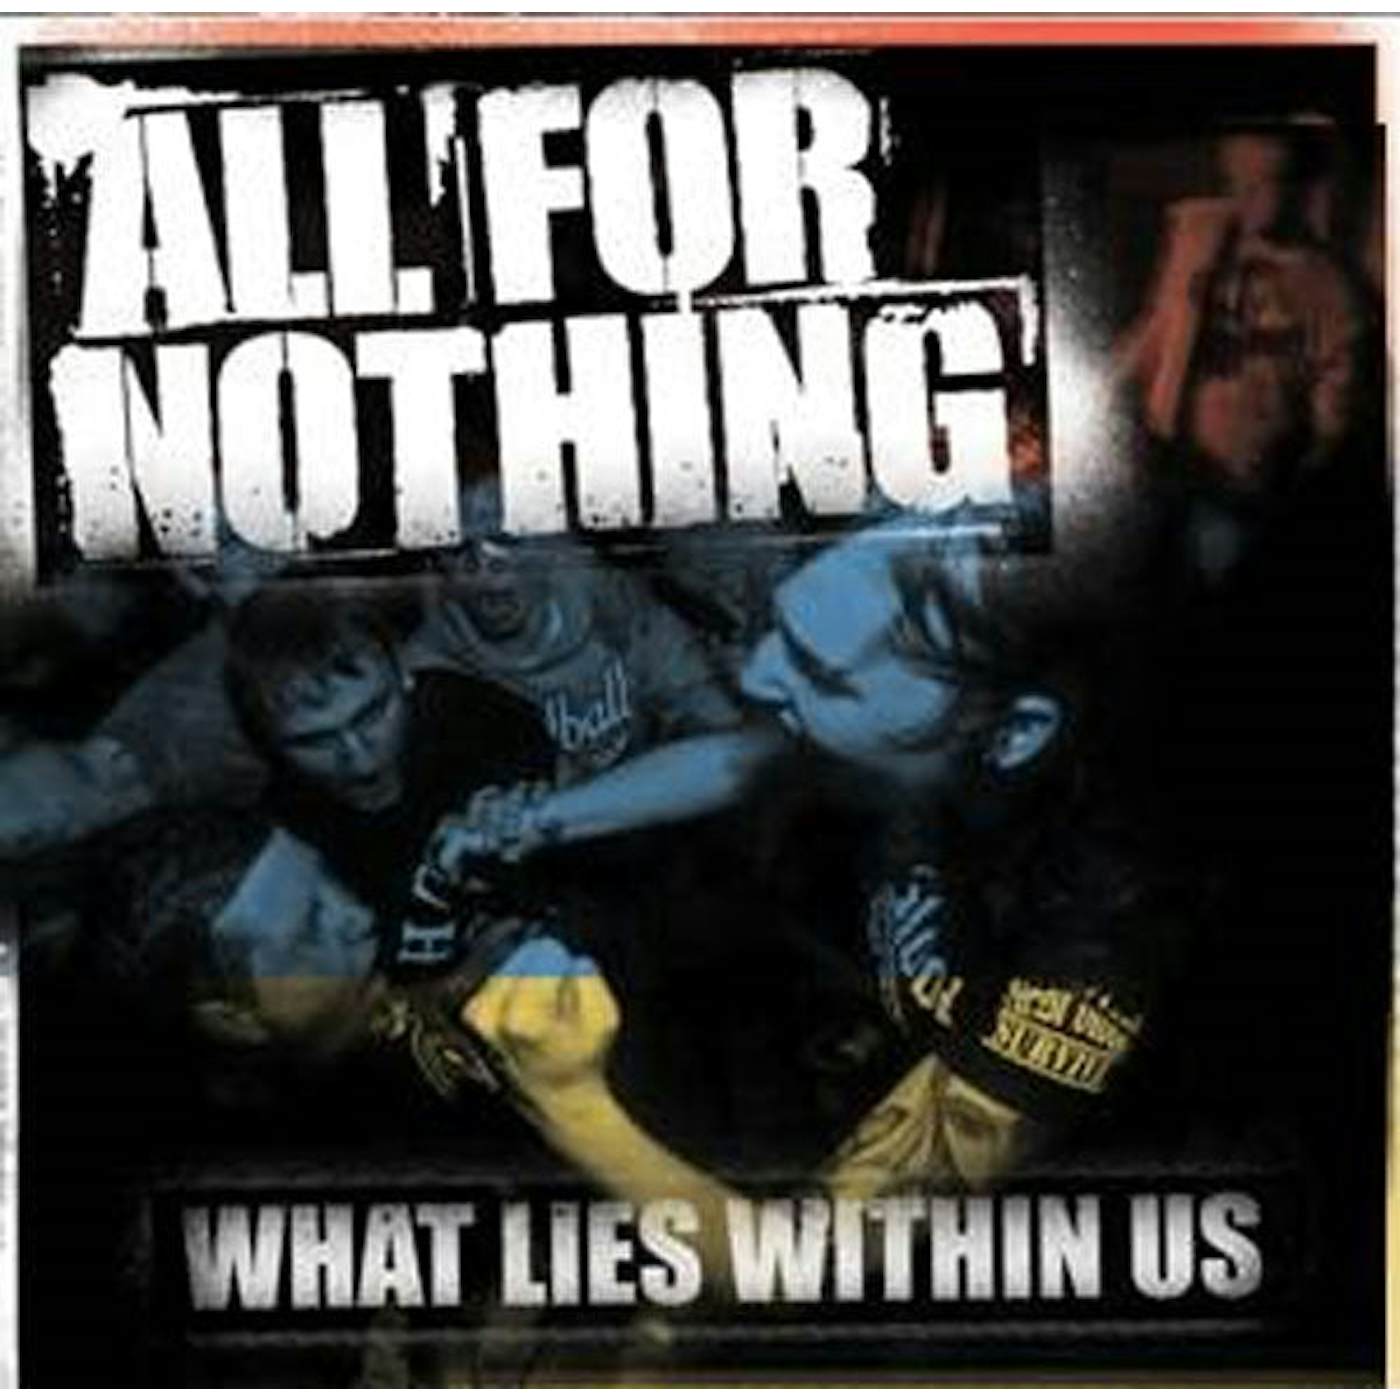  All Or Nothing: CDs & Vinyl